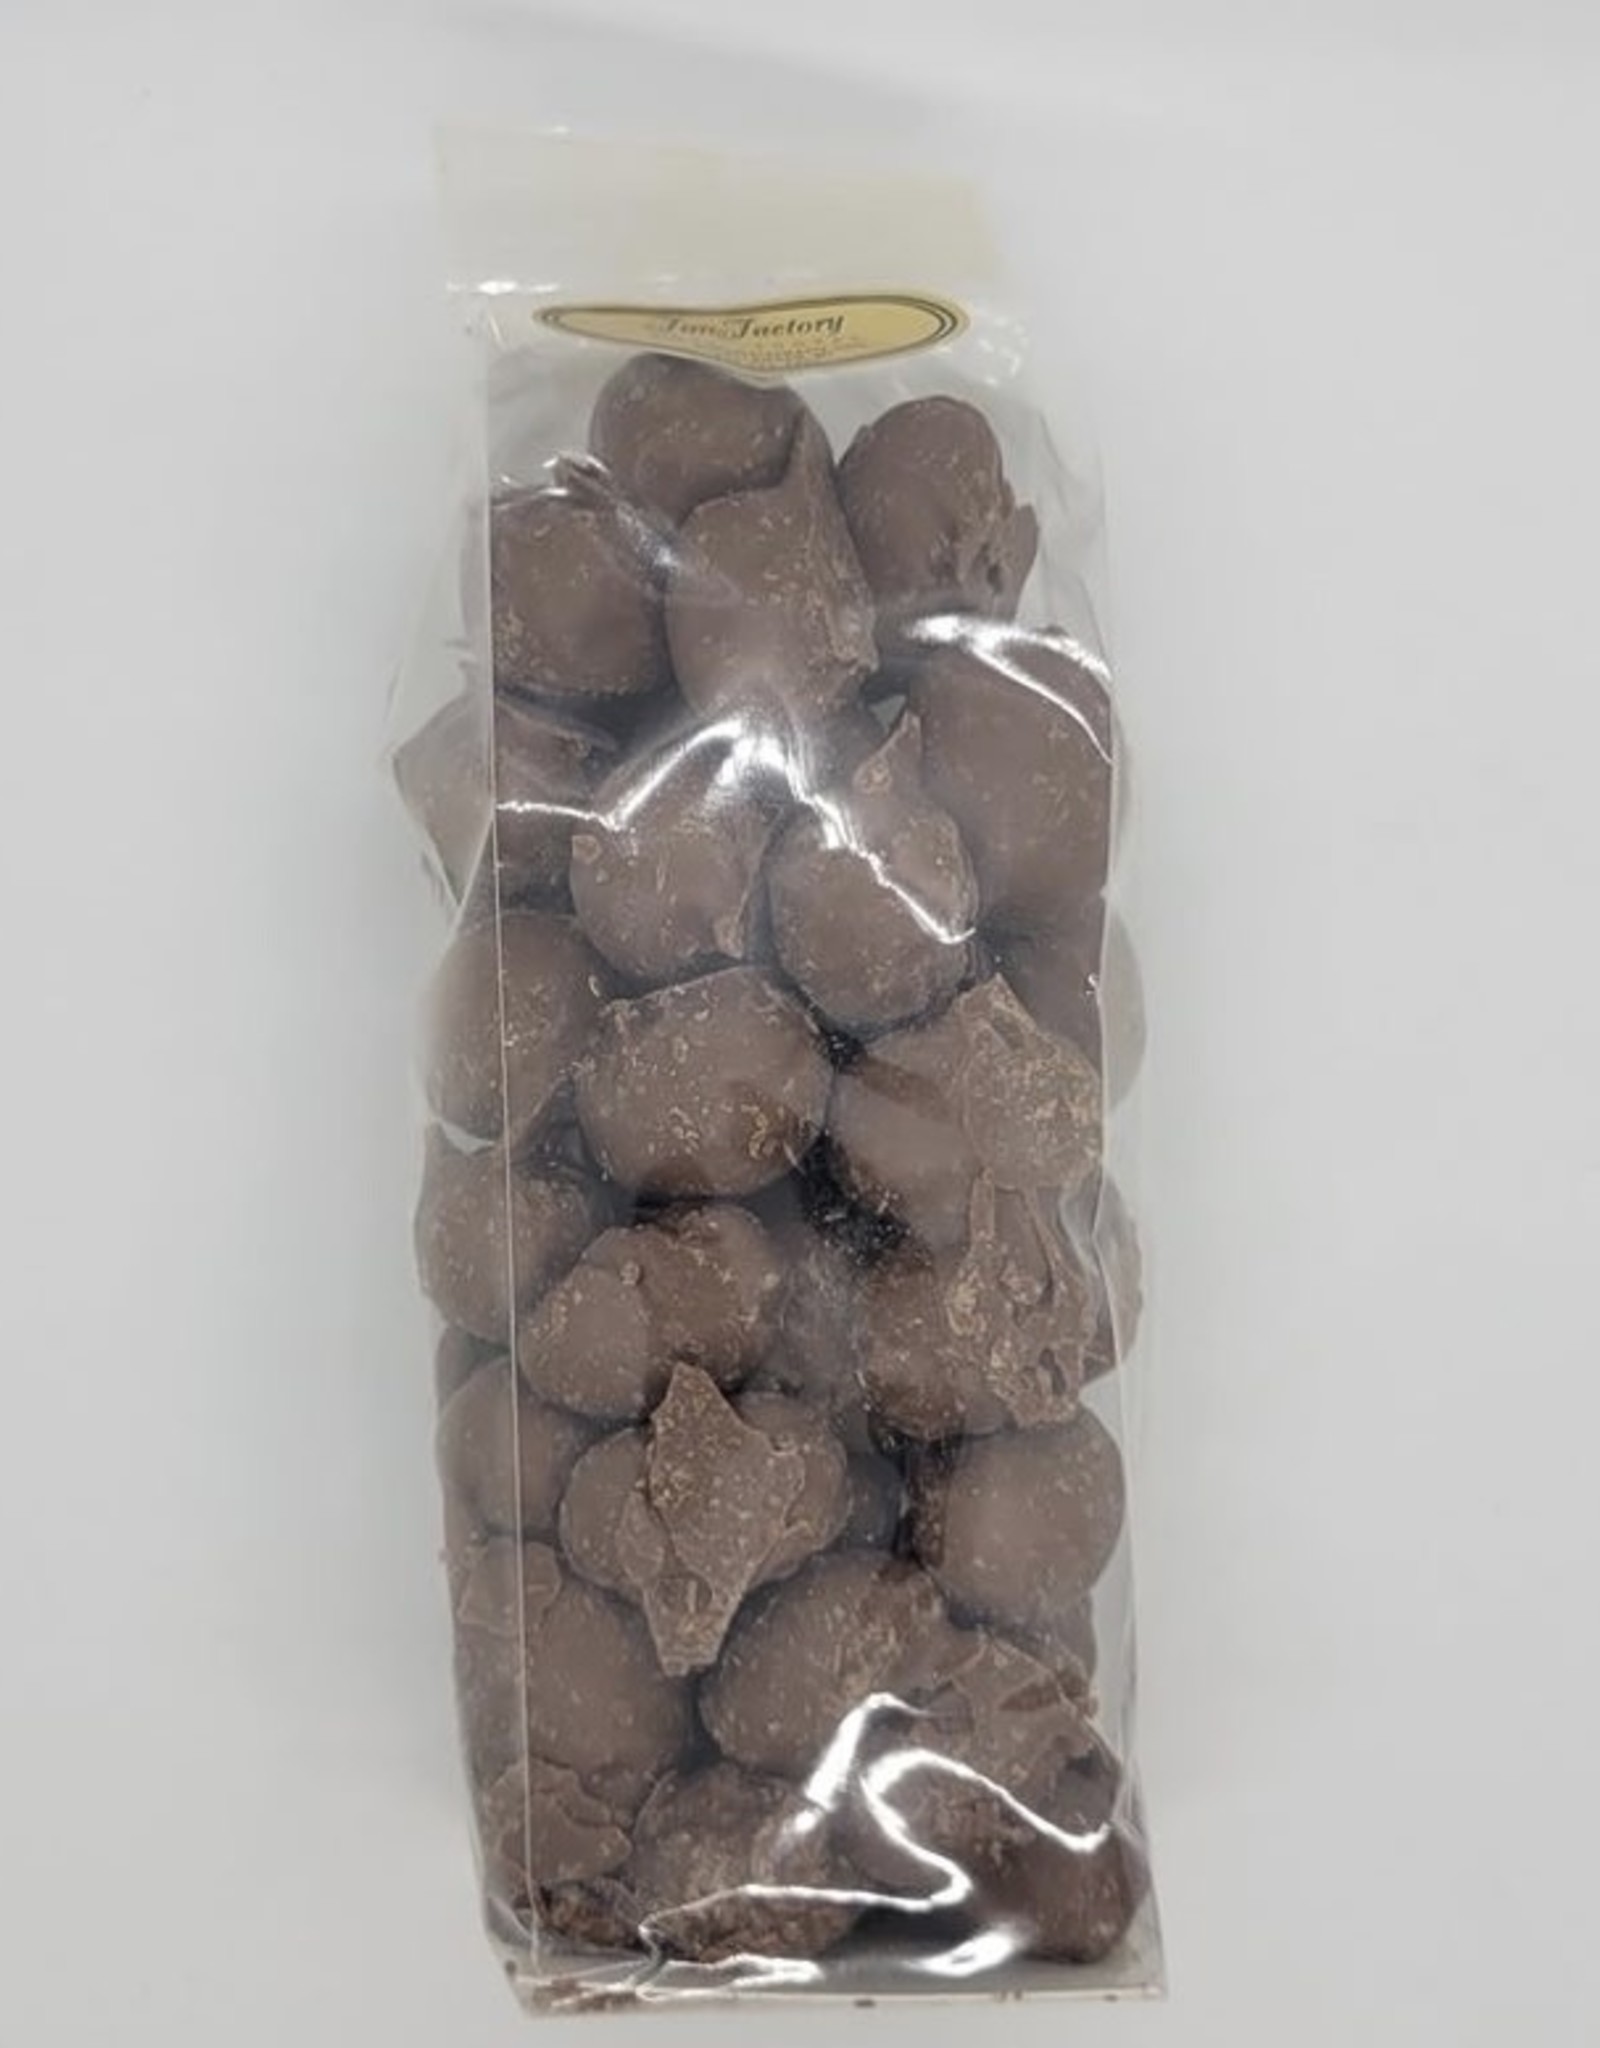 Fun Factory Sweet Shoppe Chocolate Covered Peanuts- Half Pound